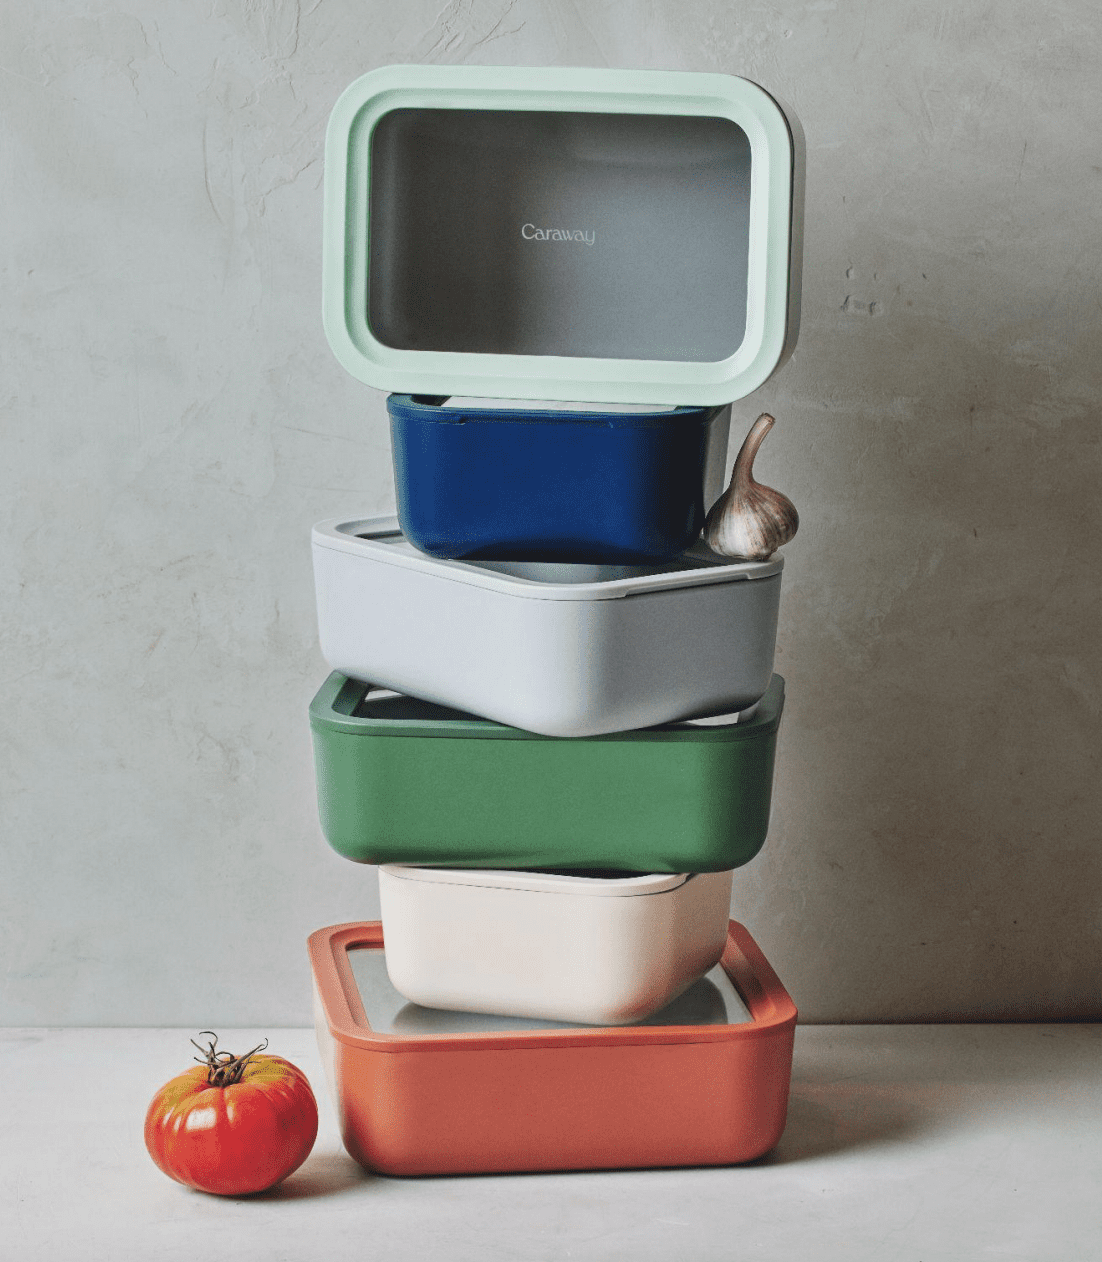 Caraway Food Storage Set Review (Is It Worth the High Price?)